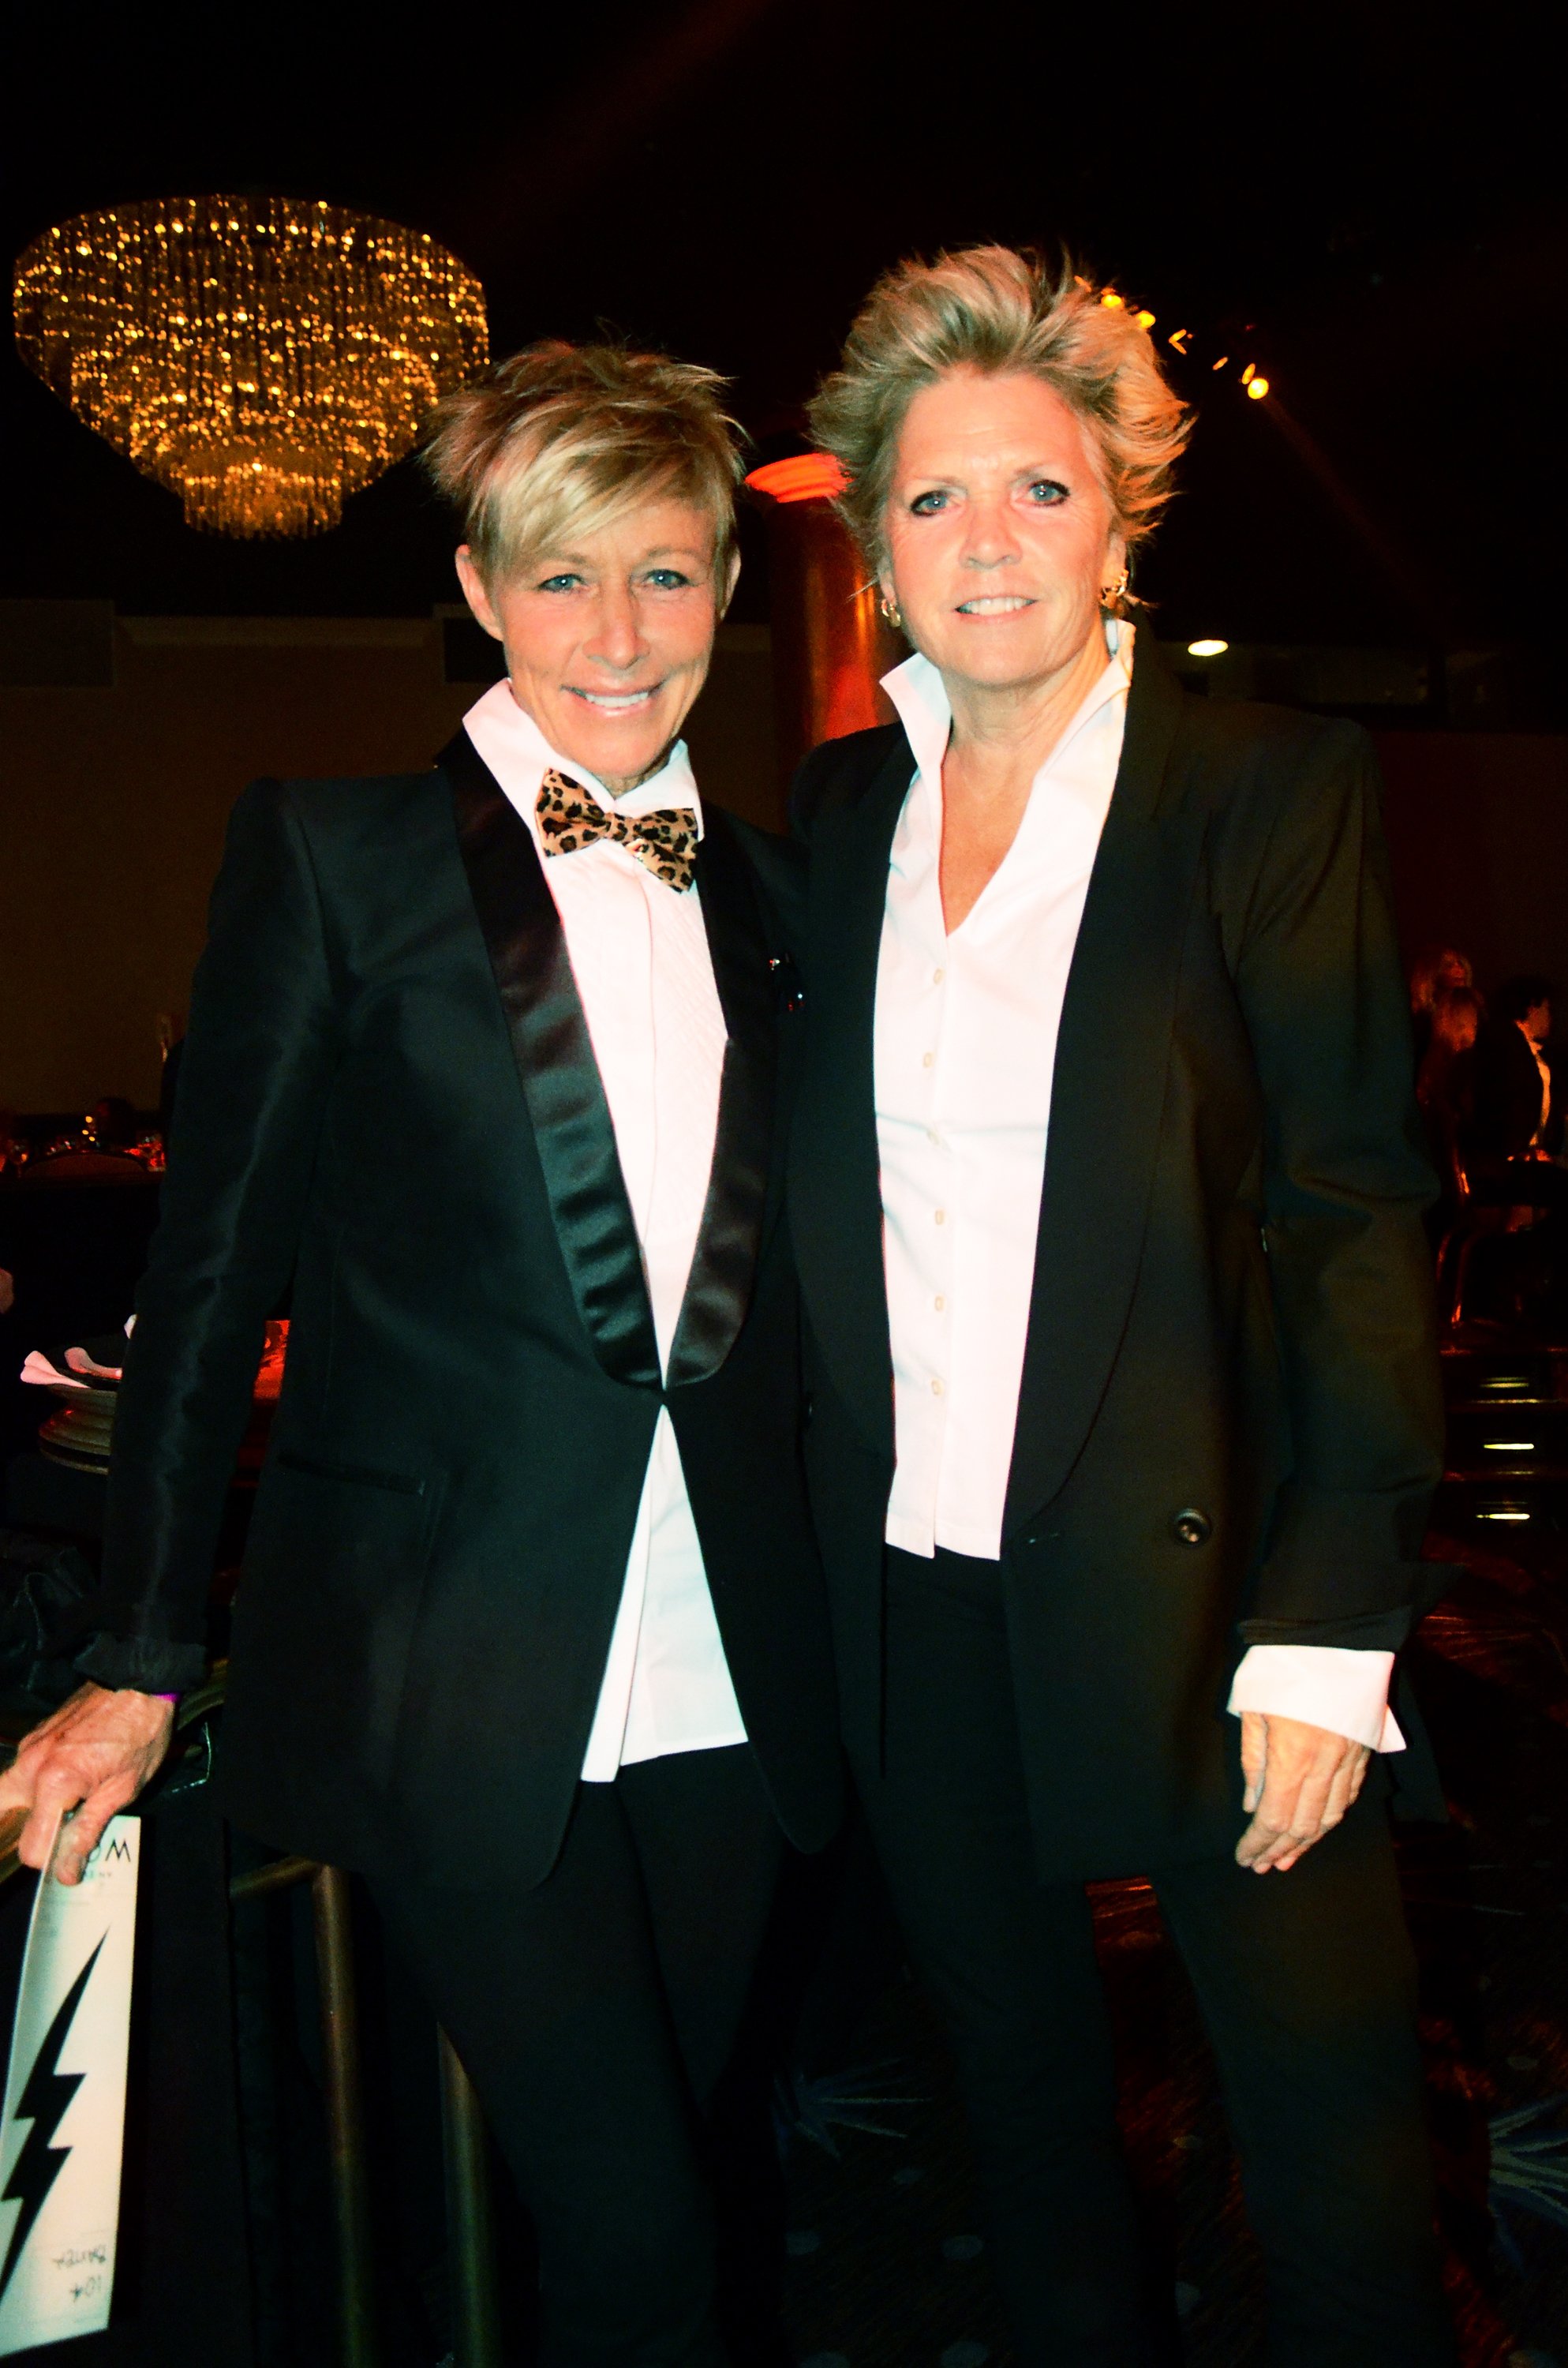 Meredith Baxter and partner Nancy Locke at the LA Gay & Lesbian Center's "An Evening with Women" gala in Beverly Hills, California in 2013 | Source: Getty Images